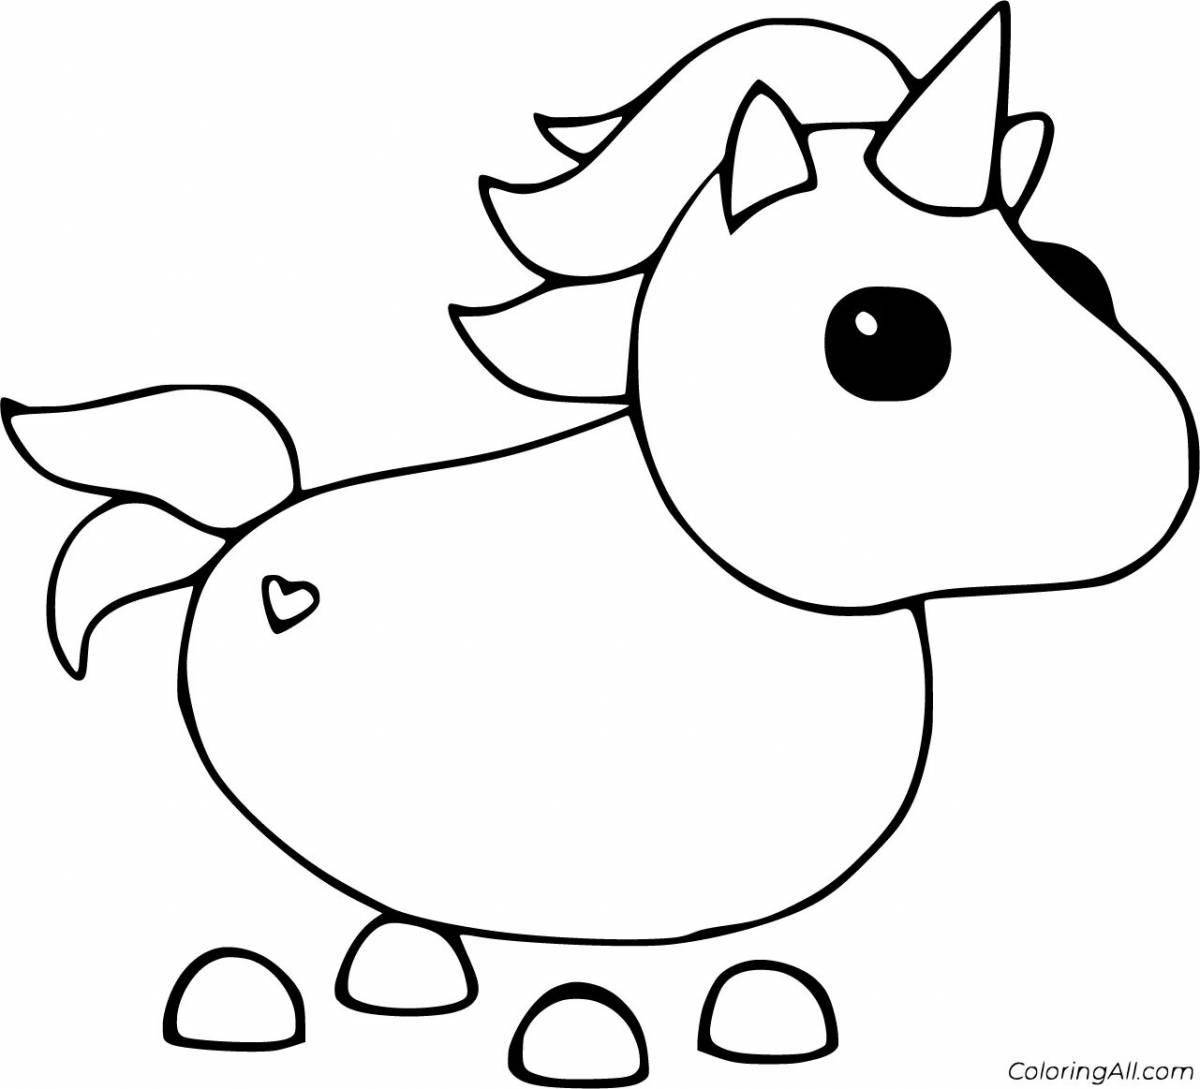 Glorious adopt me peta and eggs coloring page